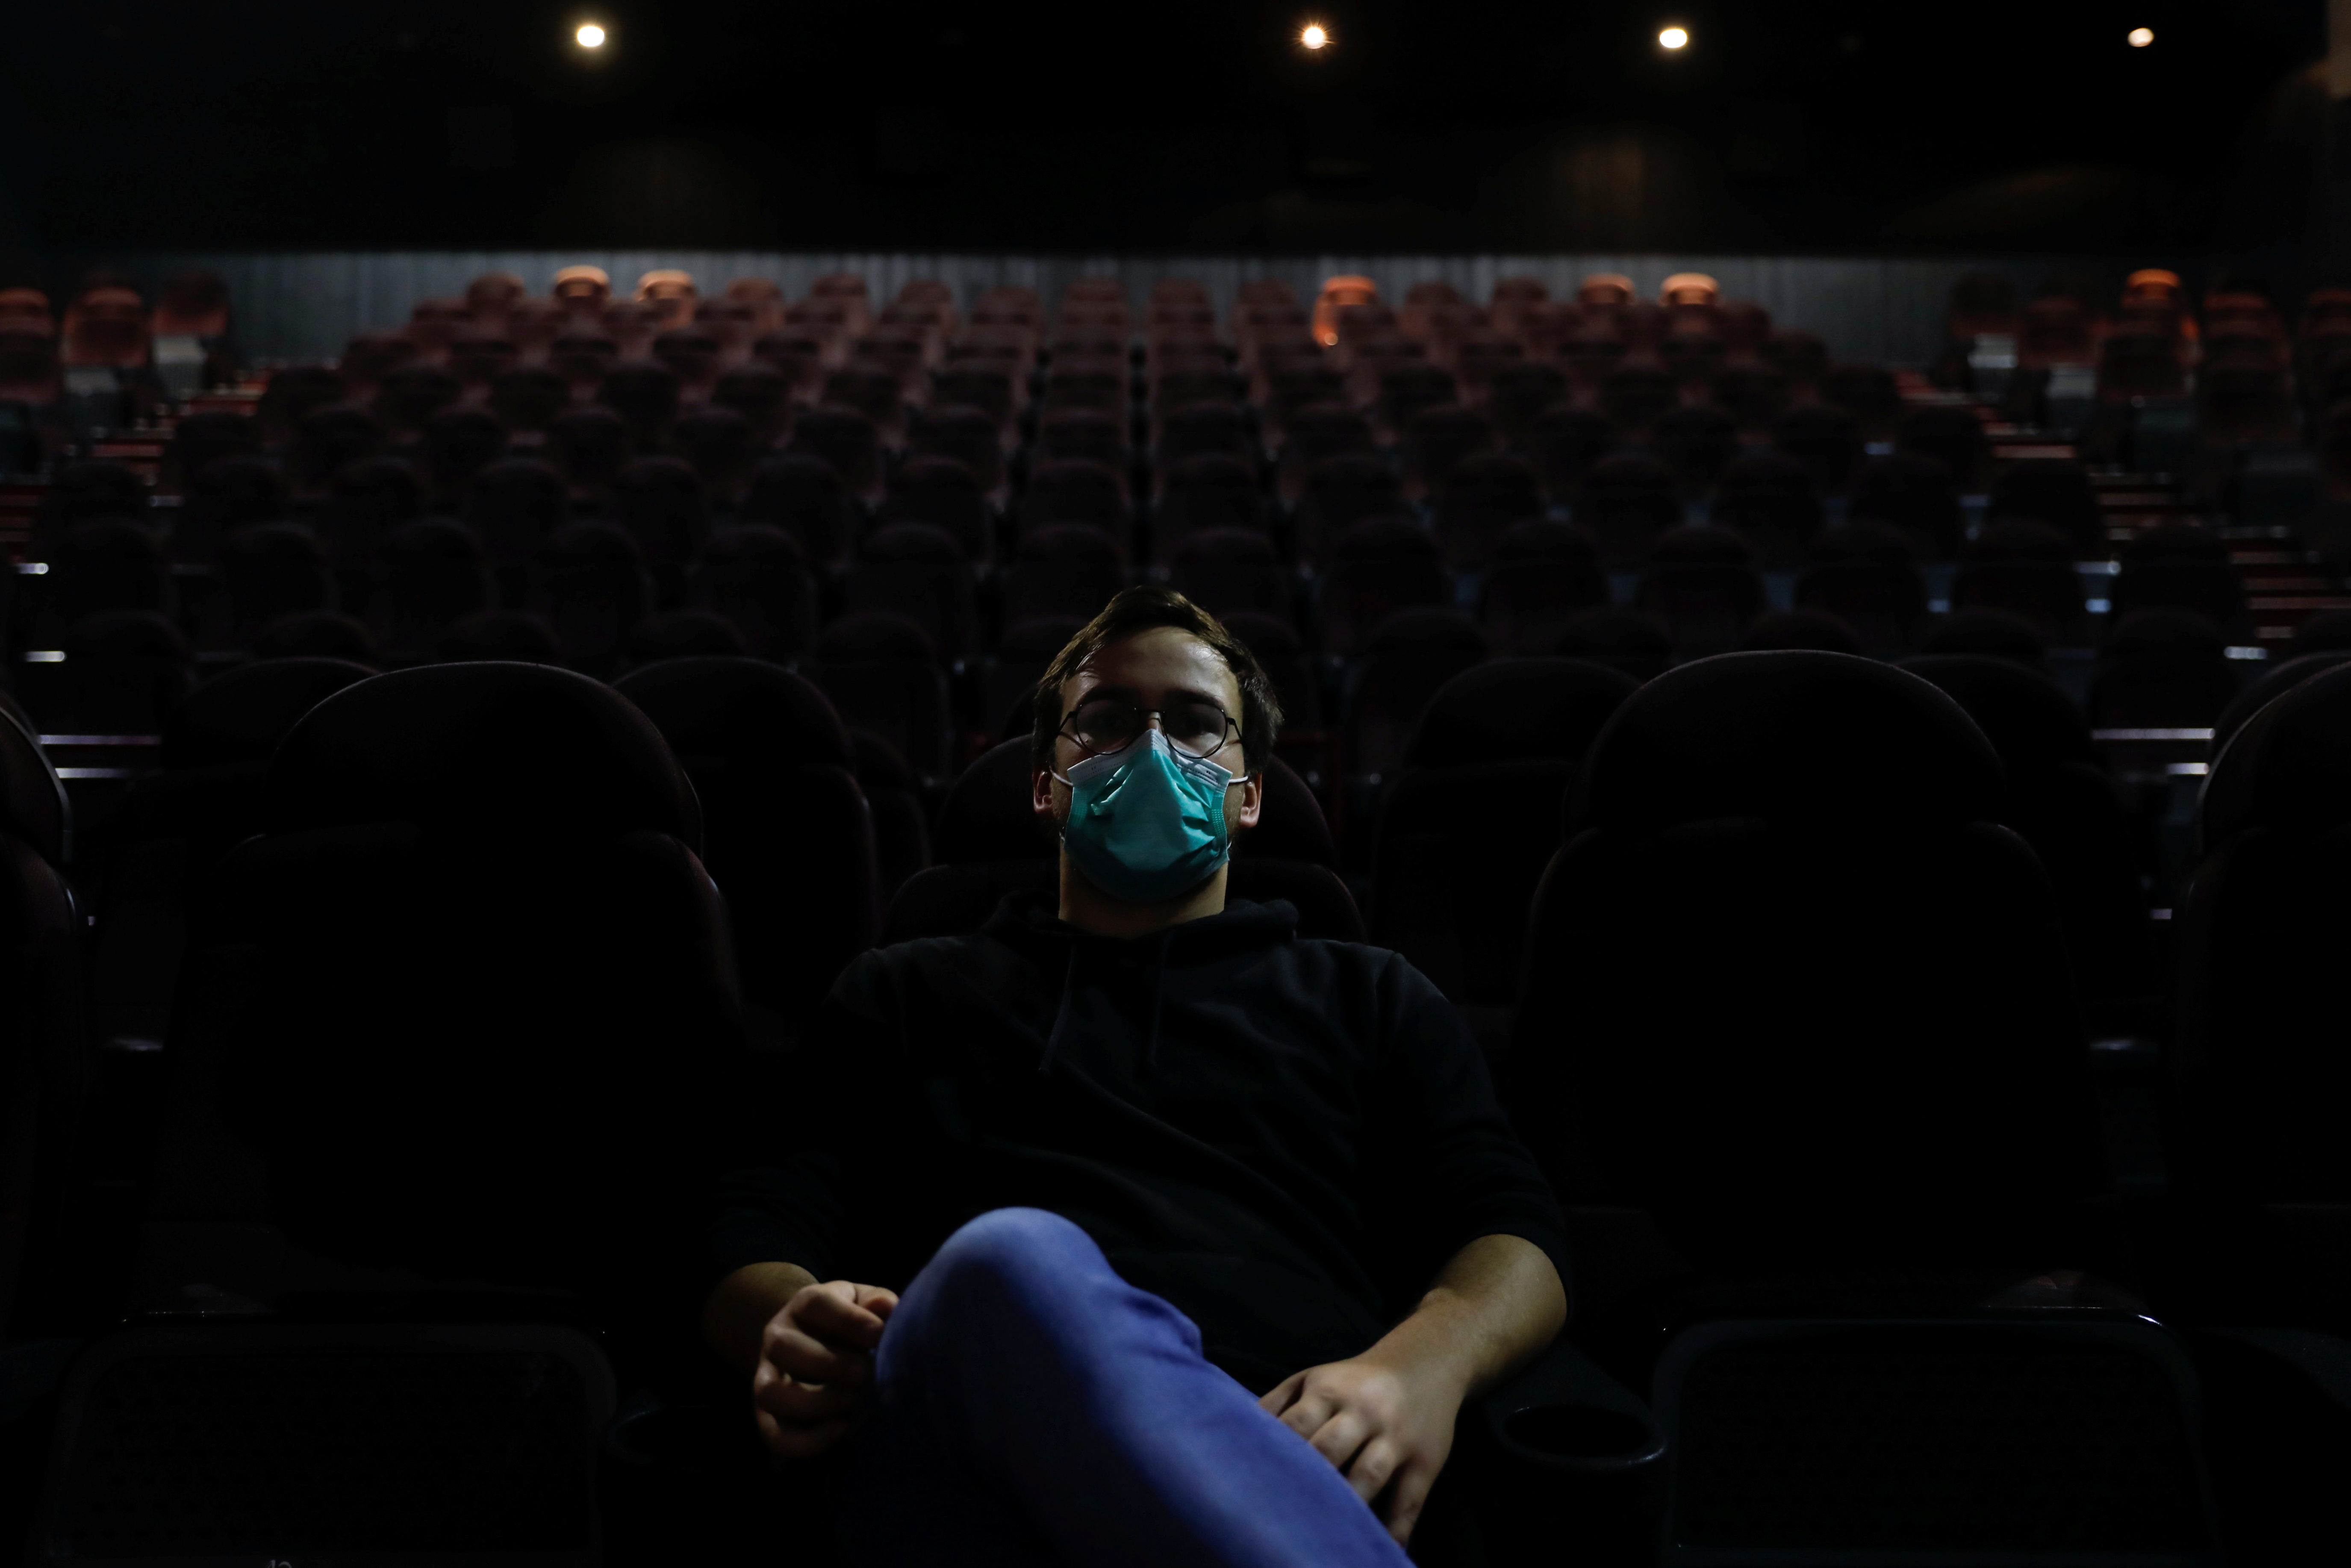 Diogo watches a movie on the first day of the opening of cinema theatres, in Sintra